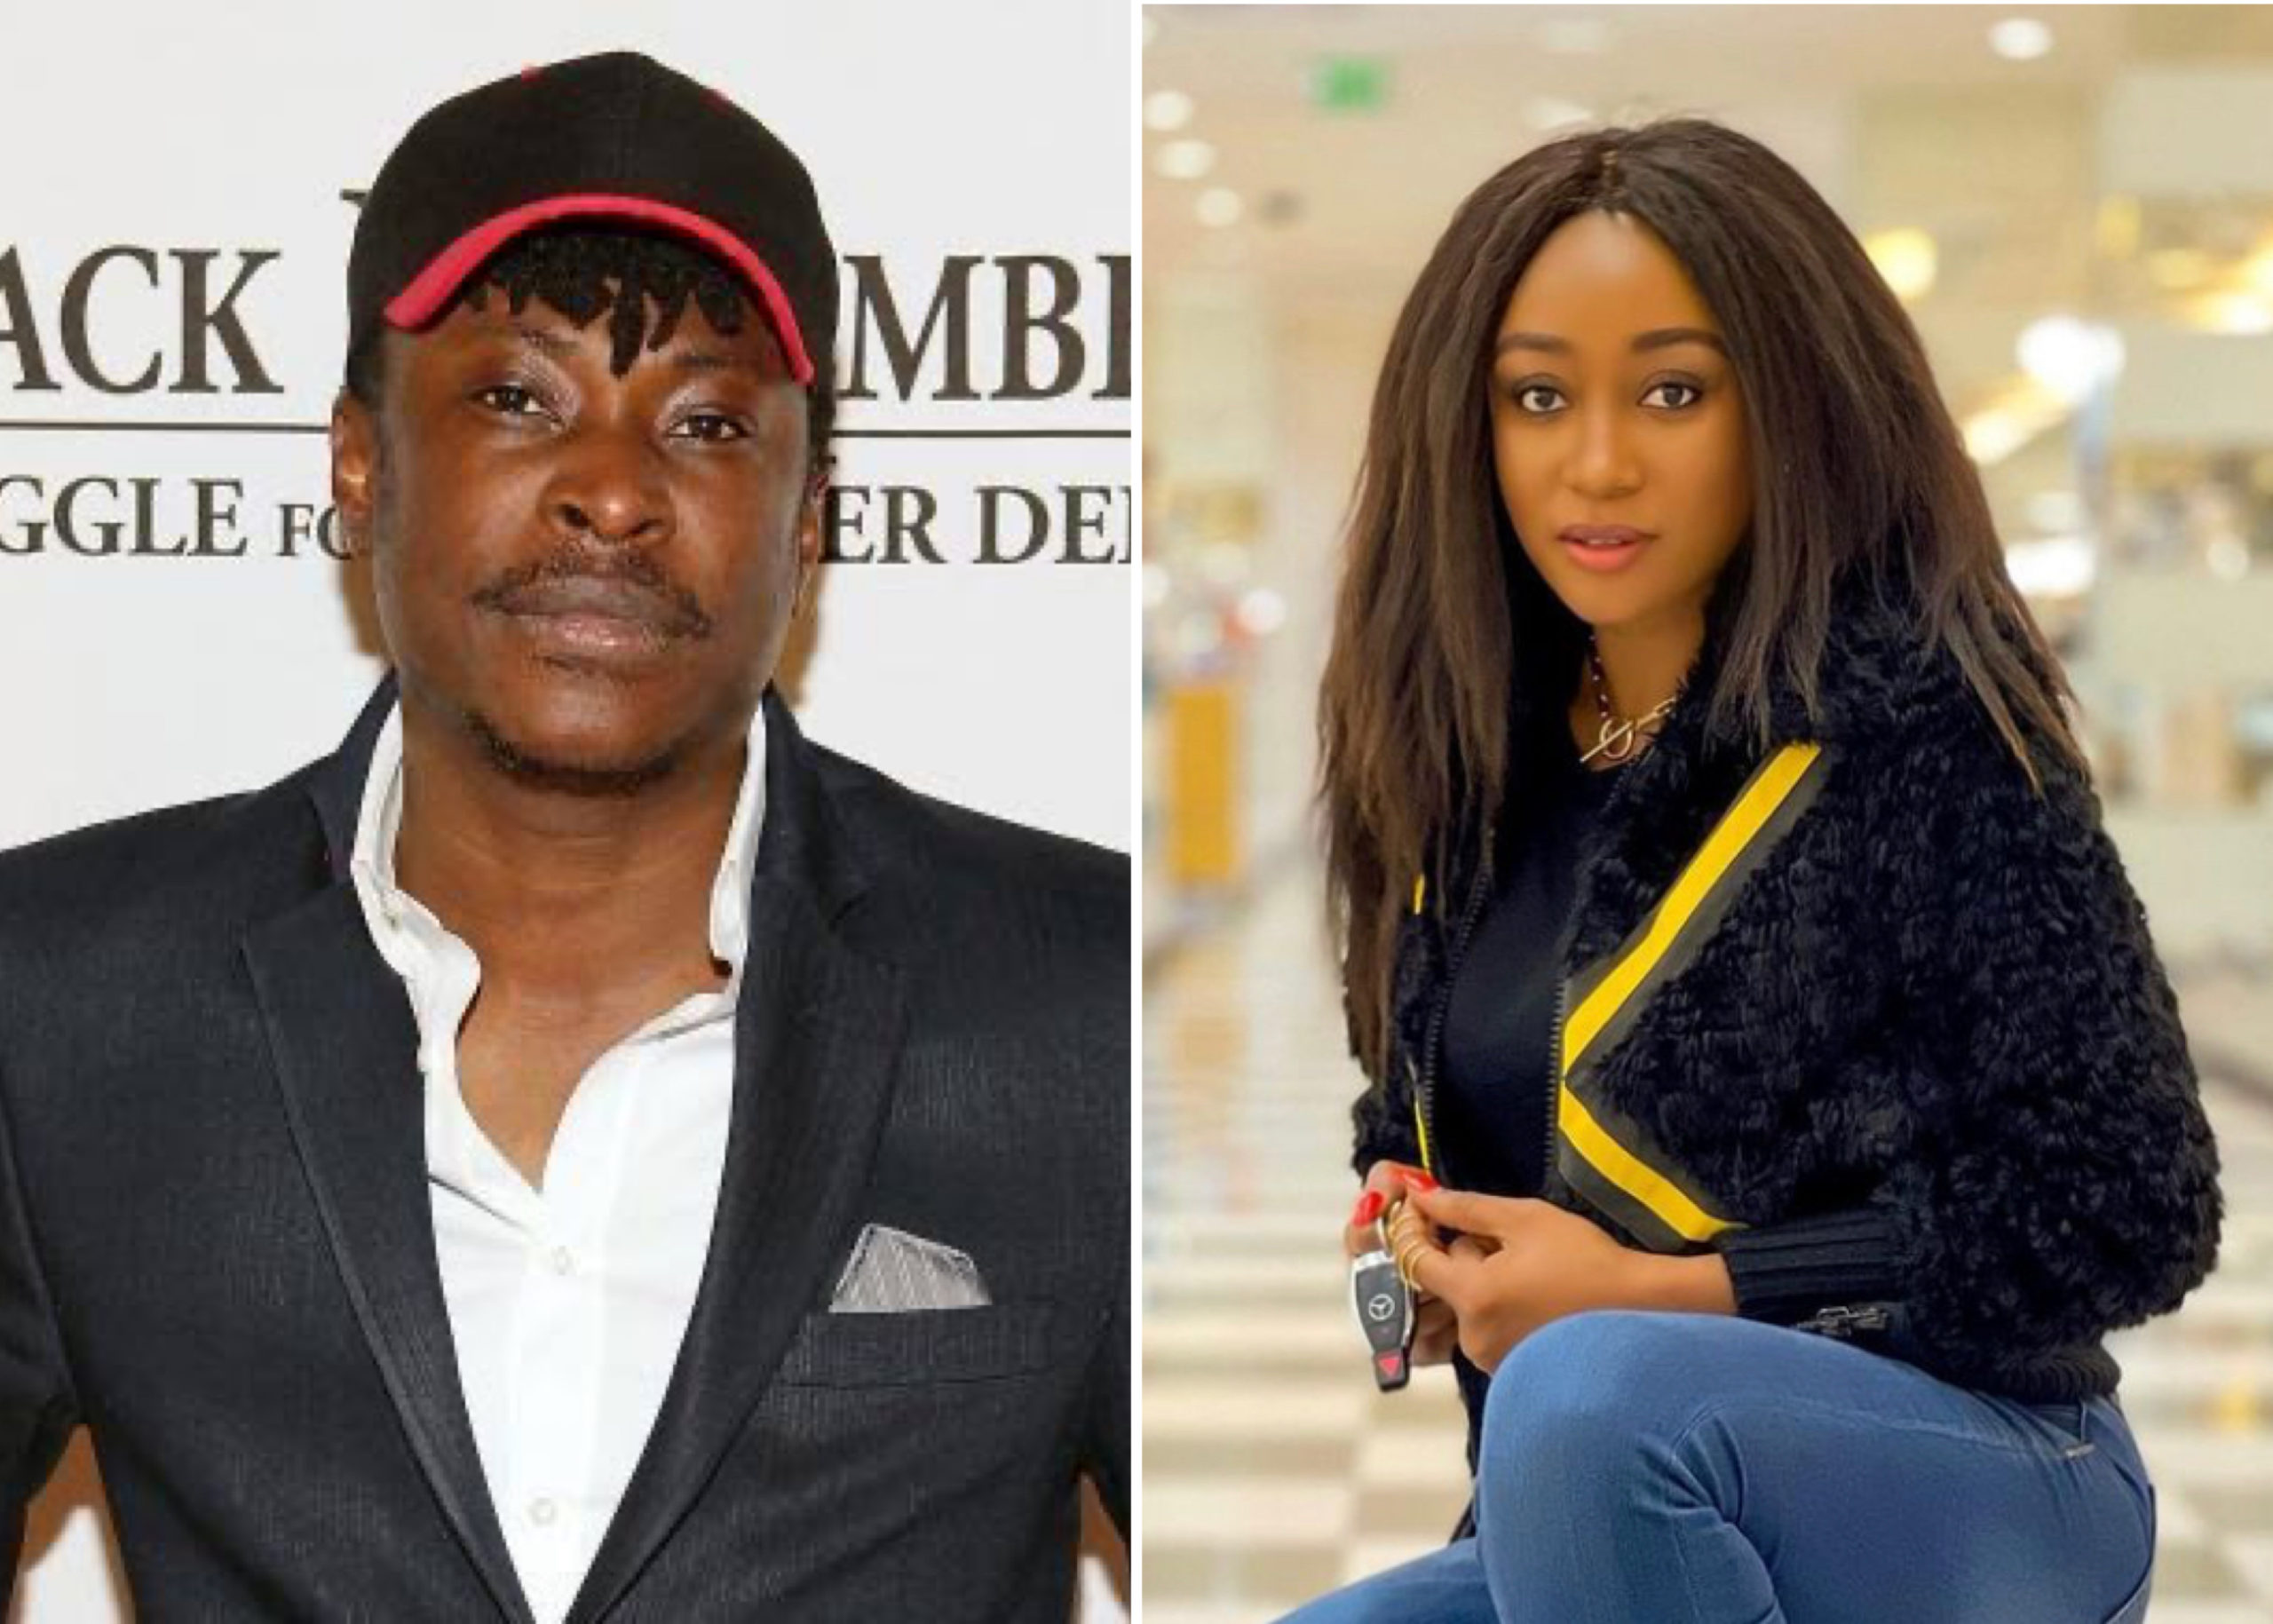 Filmmaker, Jeta Amata Raises Alarm Over Disappearance Of Ex-Wife Mbong, Daughter Calls Out To Mom